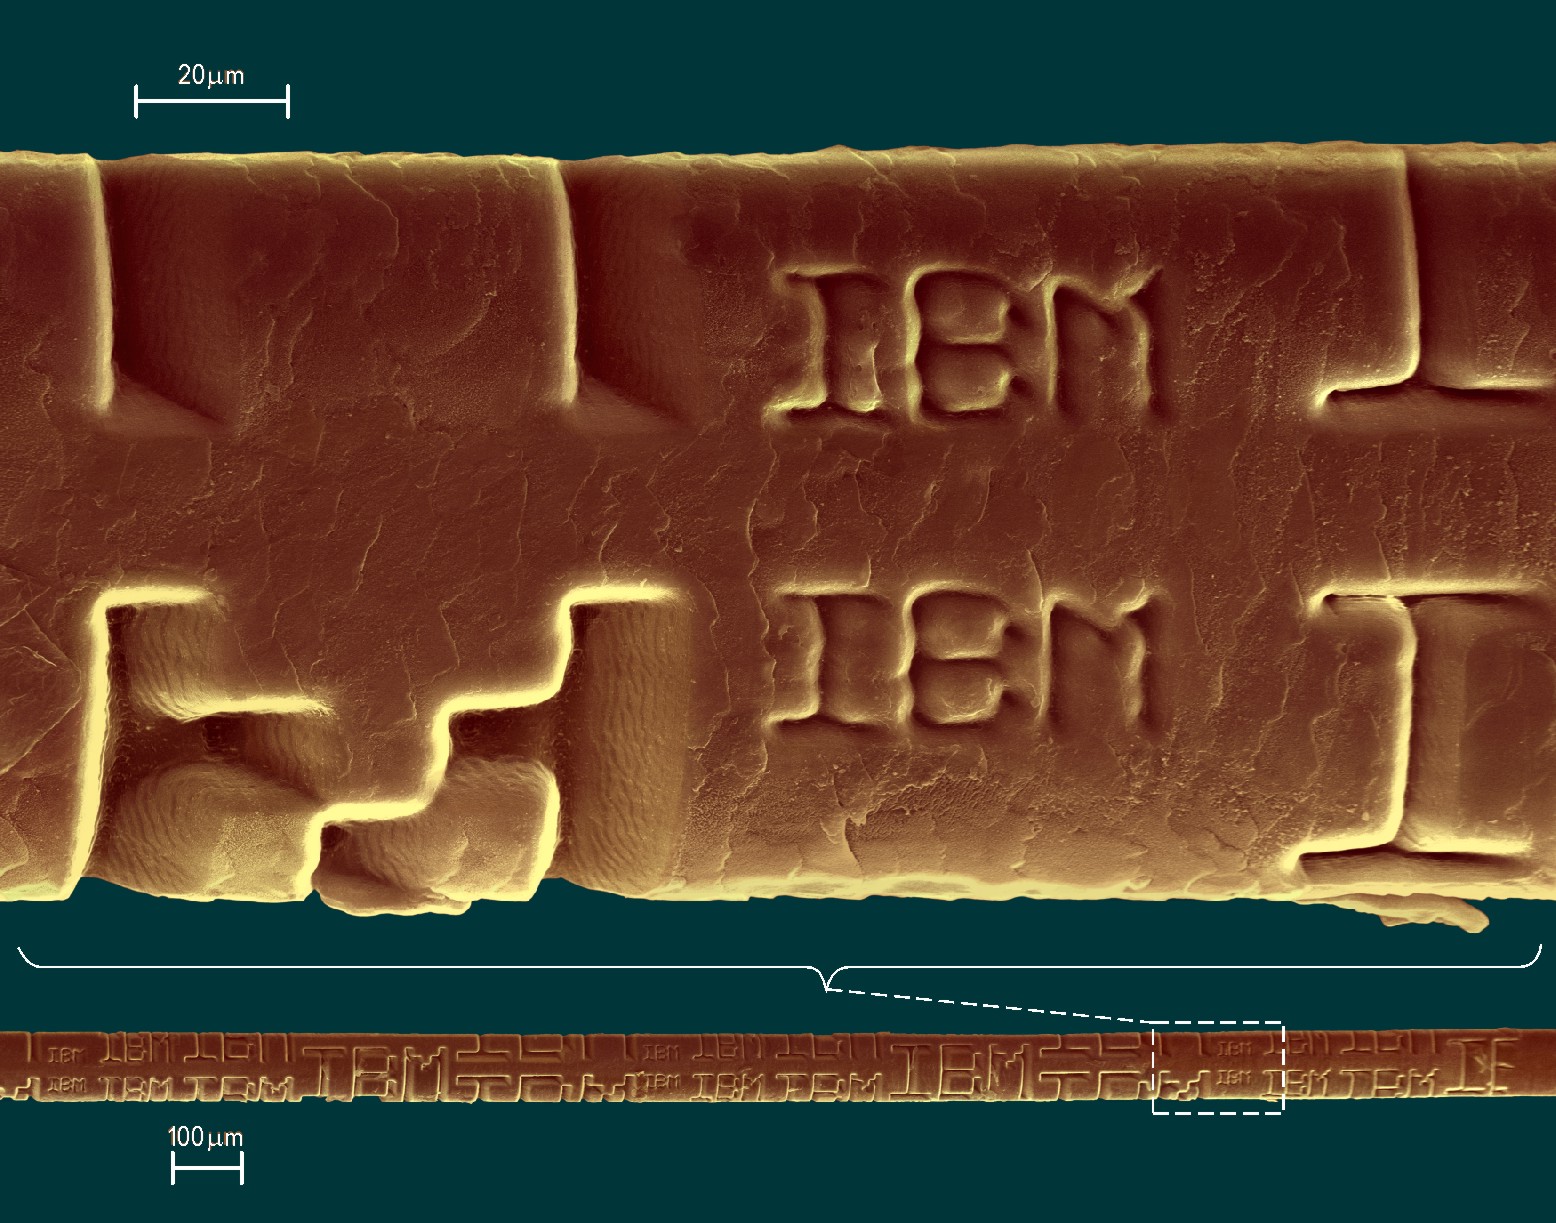 Human hair etched by excimer laser